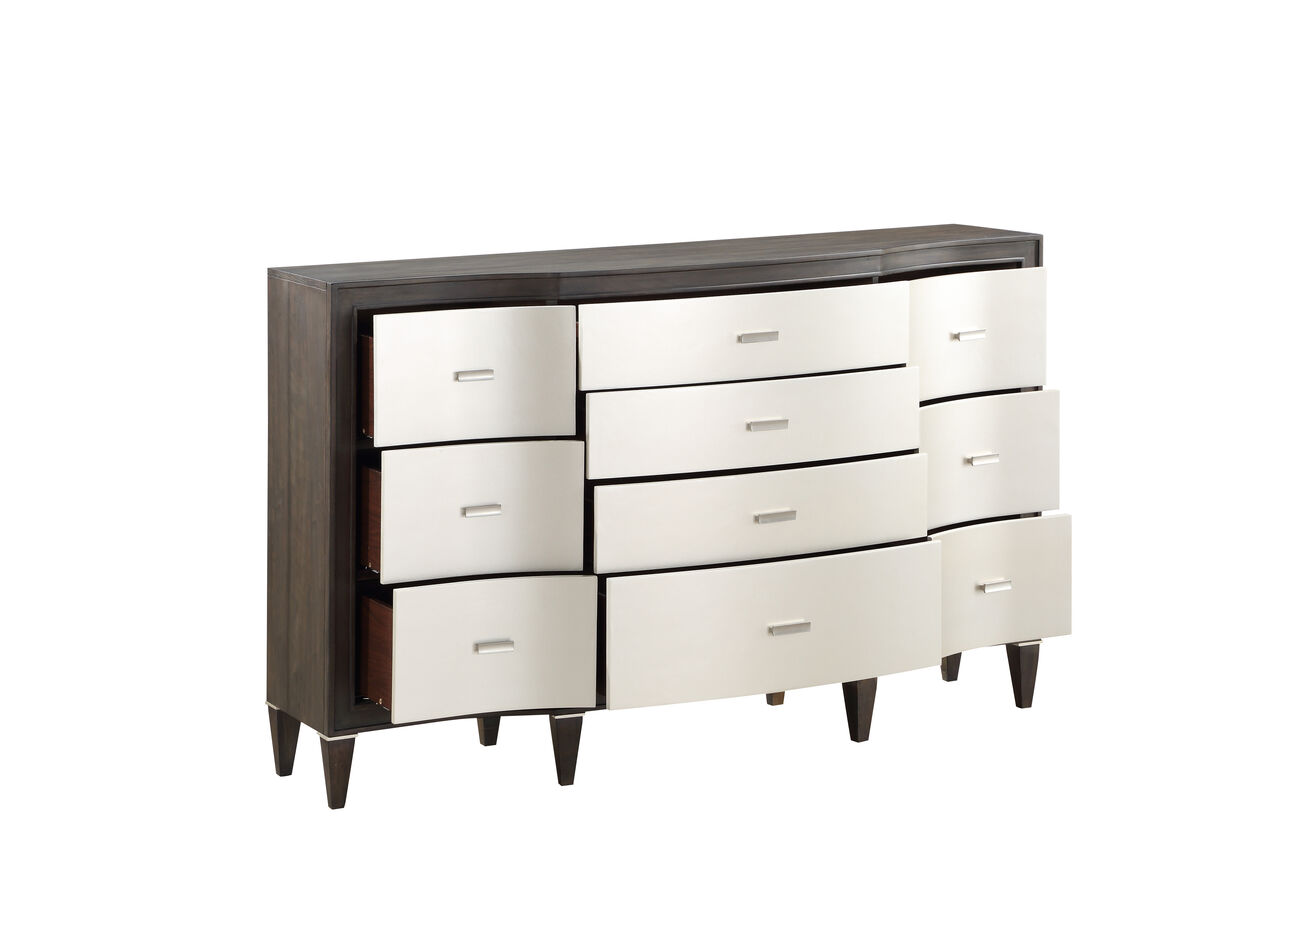 Transitional Style Dresser with Bulged Front Drawer Panel, Silver and Brown